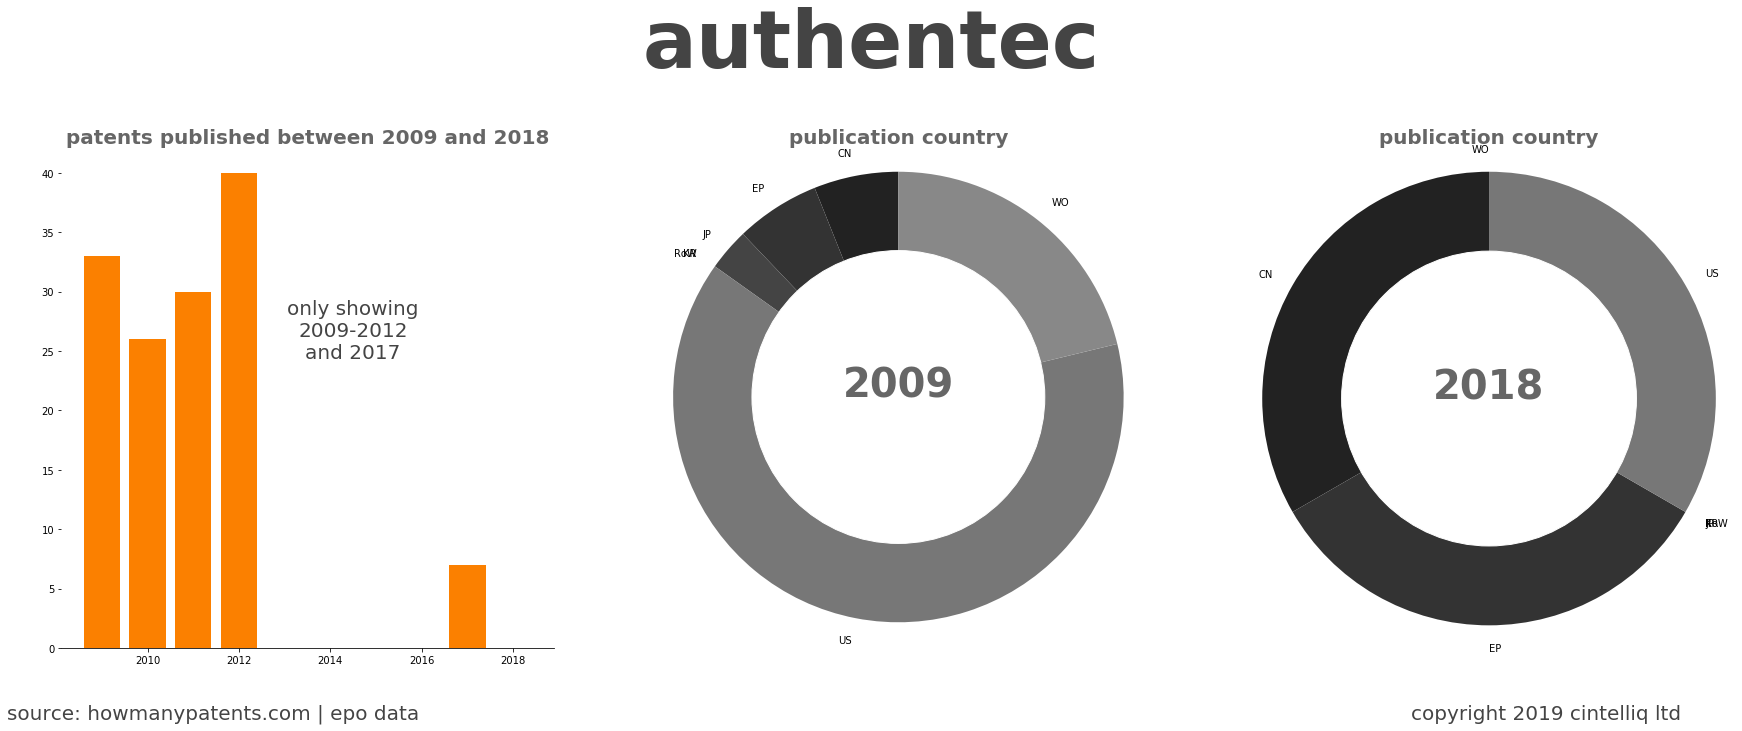 summary of patents for Authentec